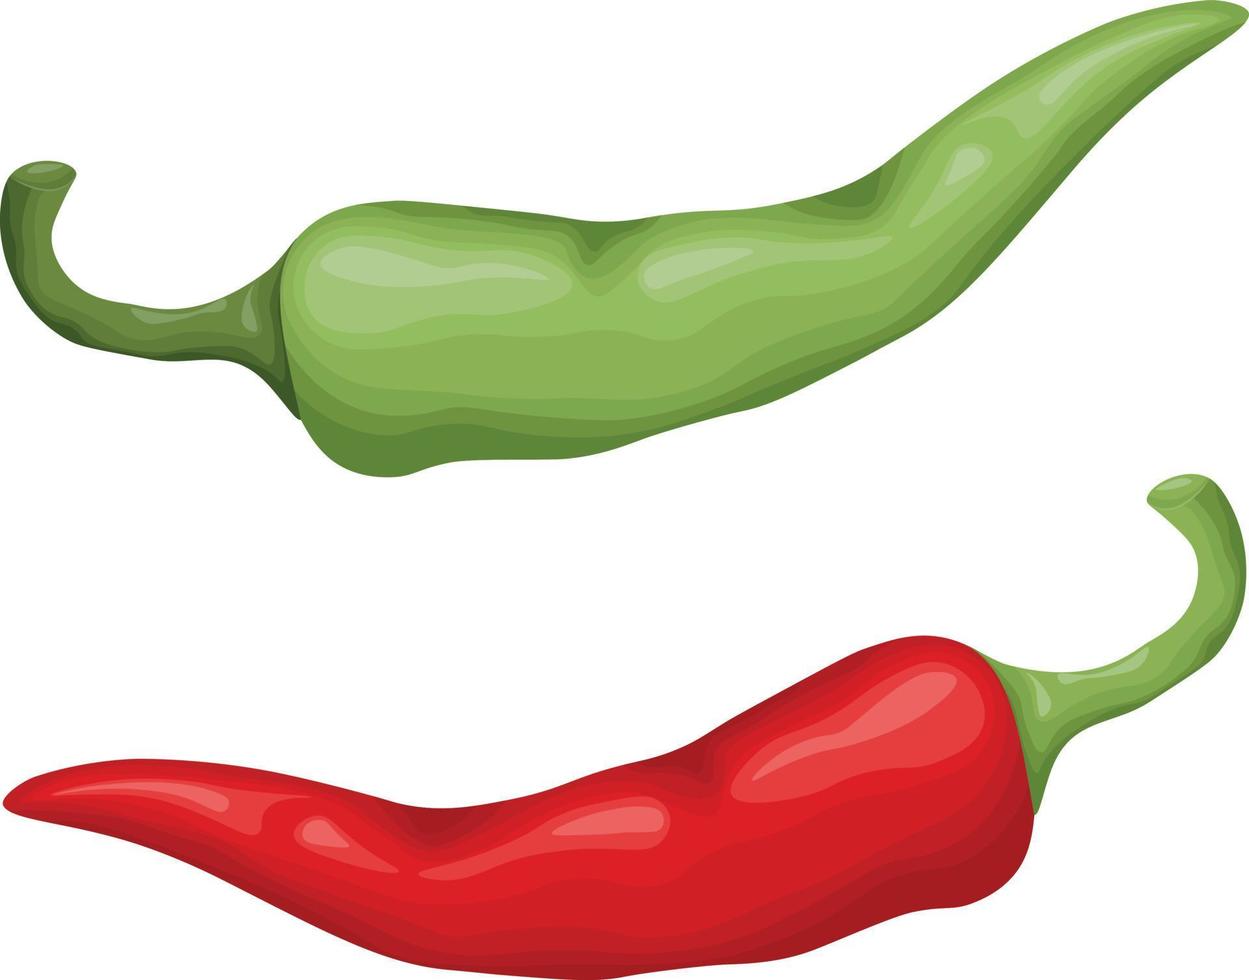 Chili pepper. Green and red chili peppers. Burning red pepper. A spicy vegetable. Vector illustration isolated on a white background